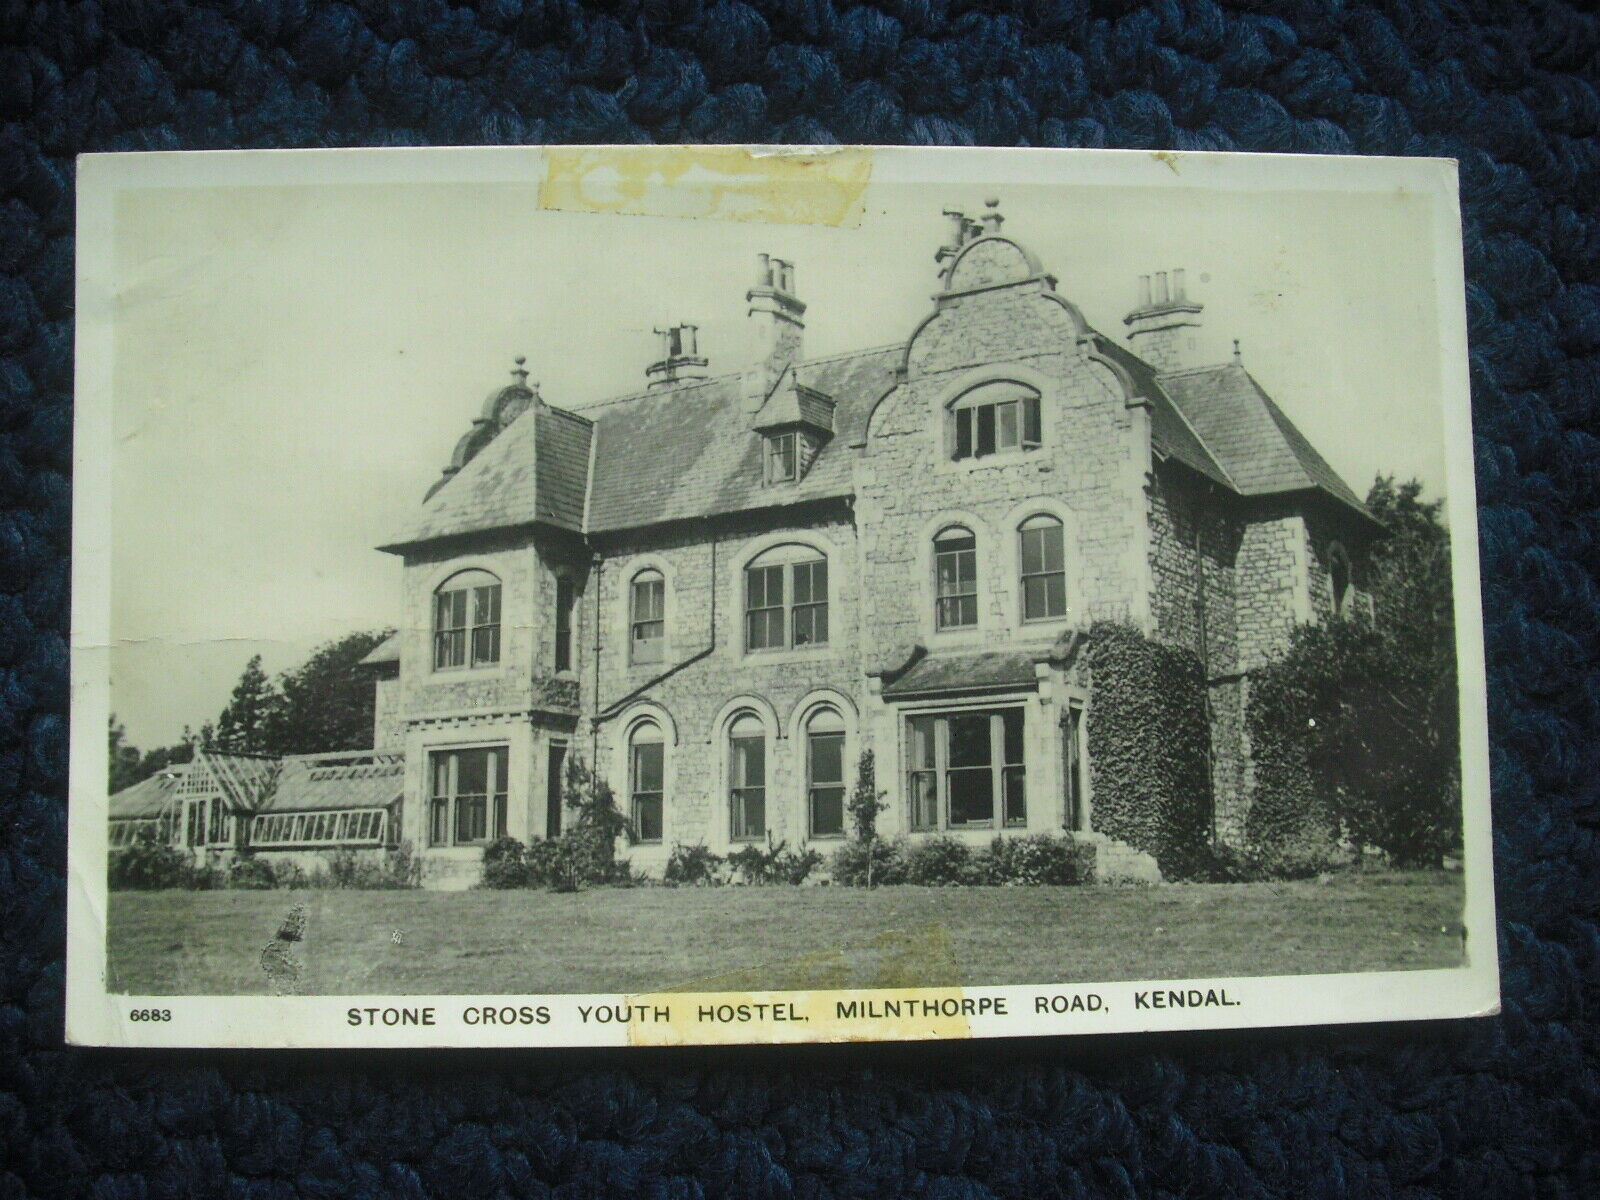 House Clearance - POSTCARD STONE CROSS YOUTH HOSTEL, MILNTHORPE ROAD, KENDAL, CUMBRIA 1960